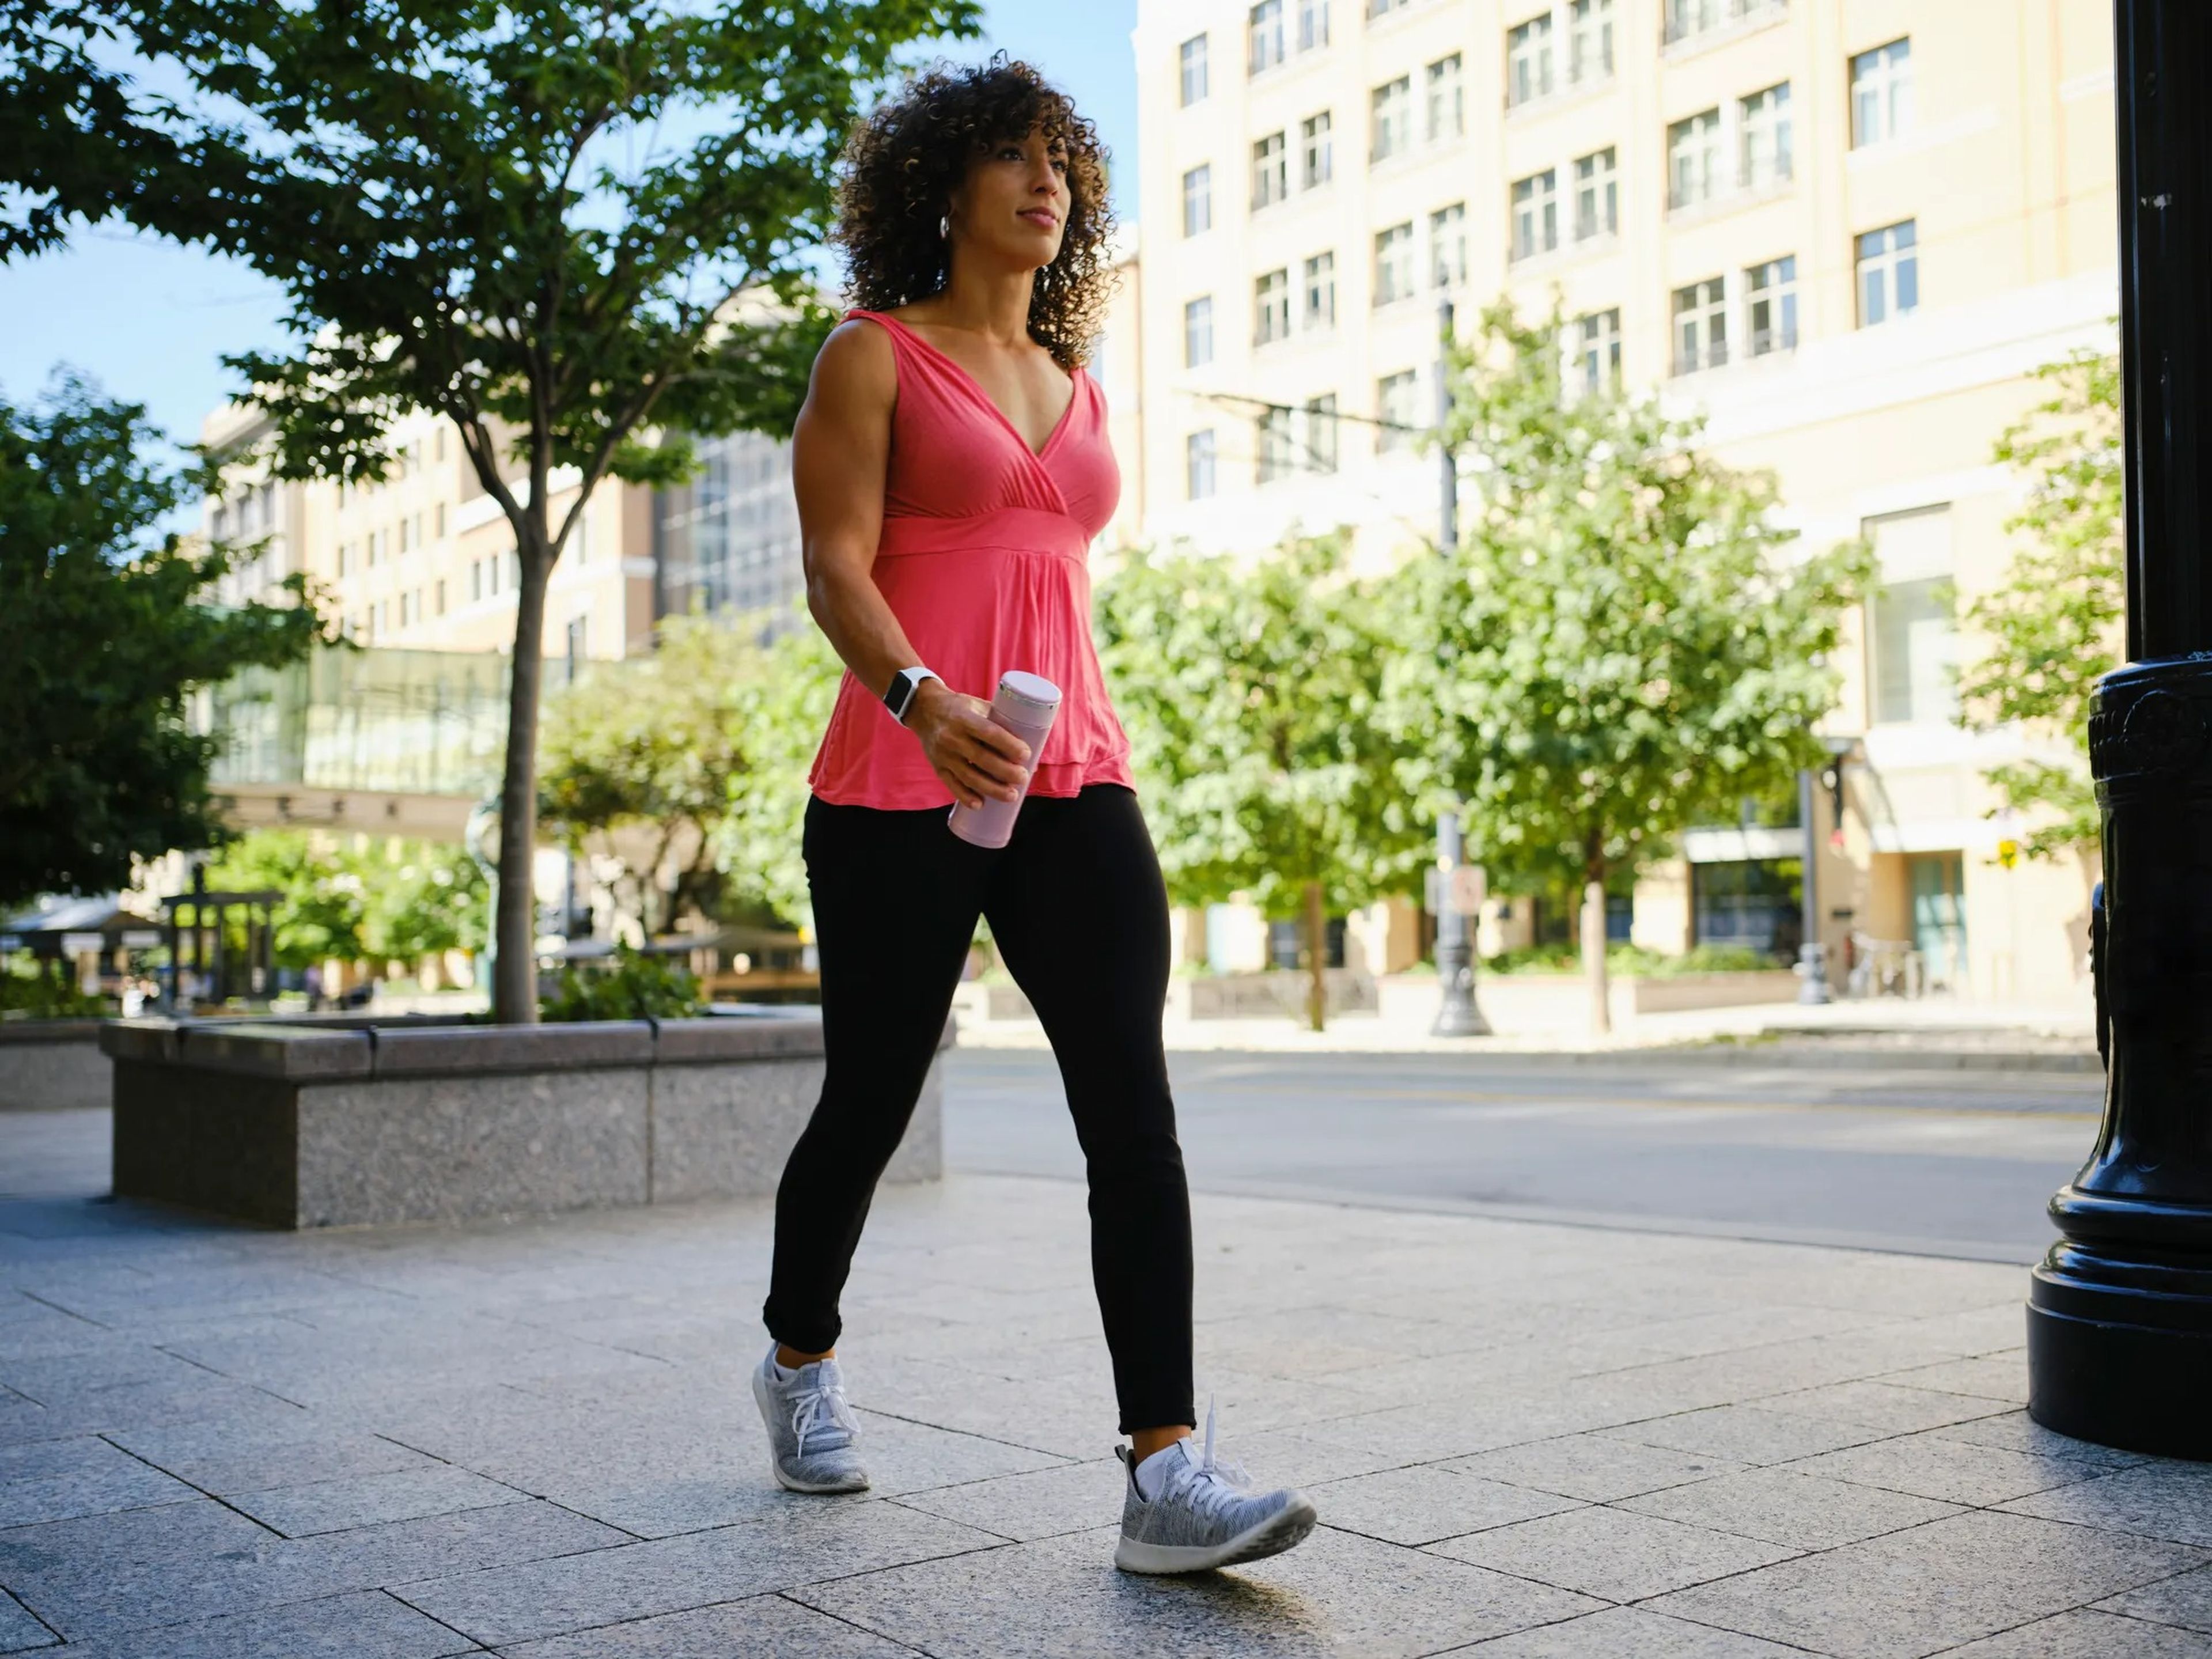 a woman walking a walk in an urban park area, wearing a pink tank top and black leggings and carrying a thermos